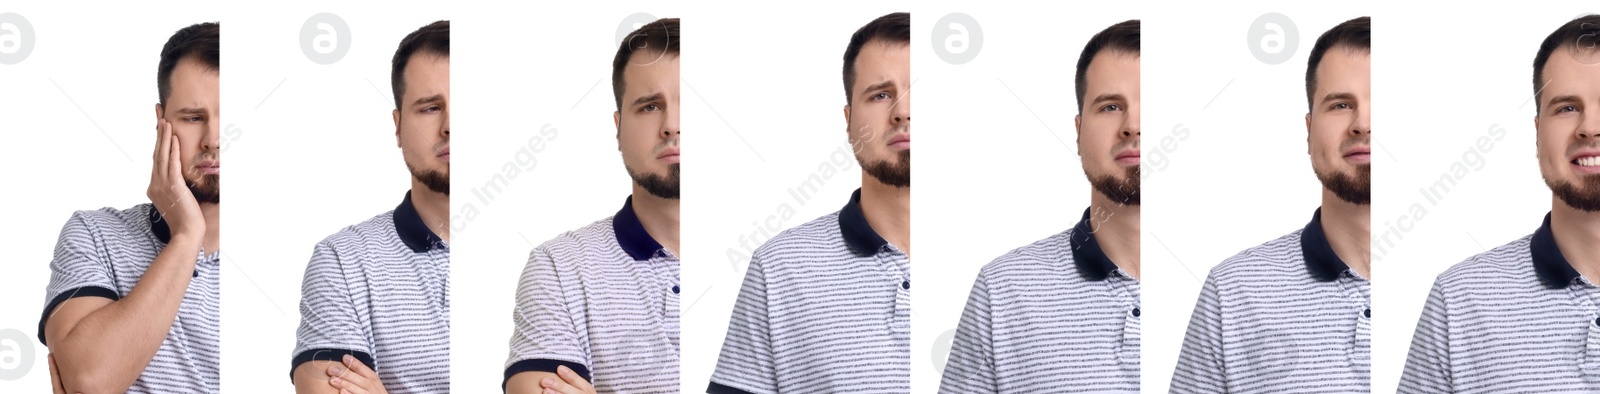 Image of Man showing different emotions on white background, collage of photos